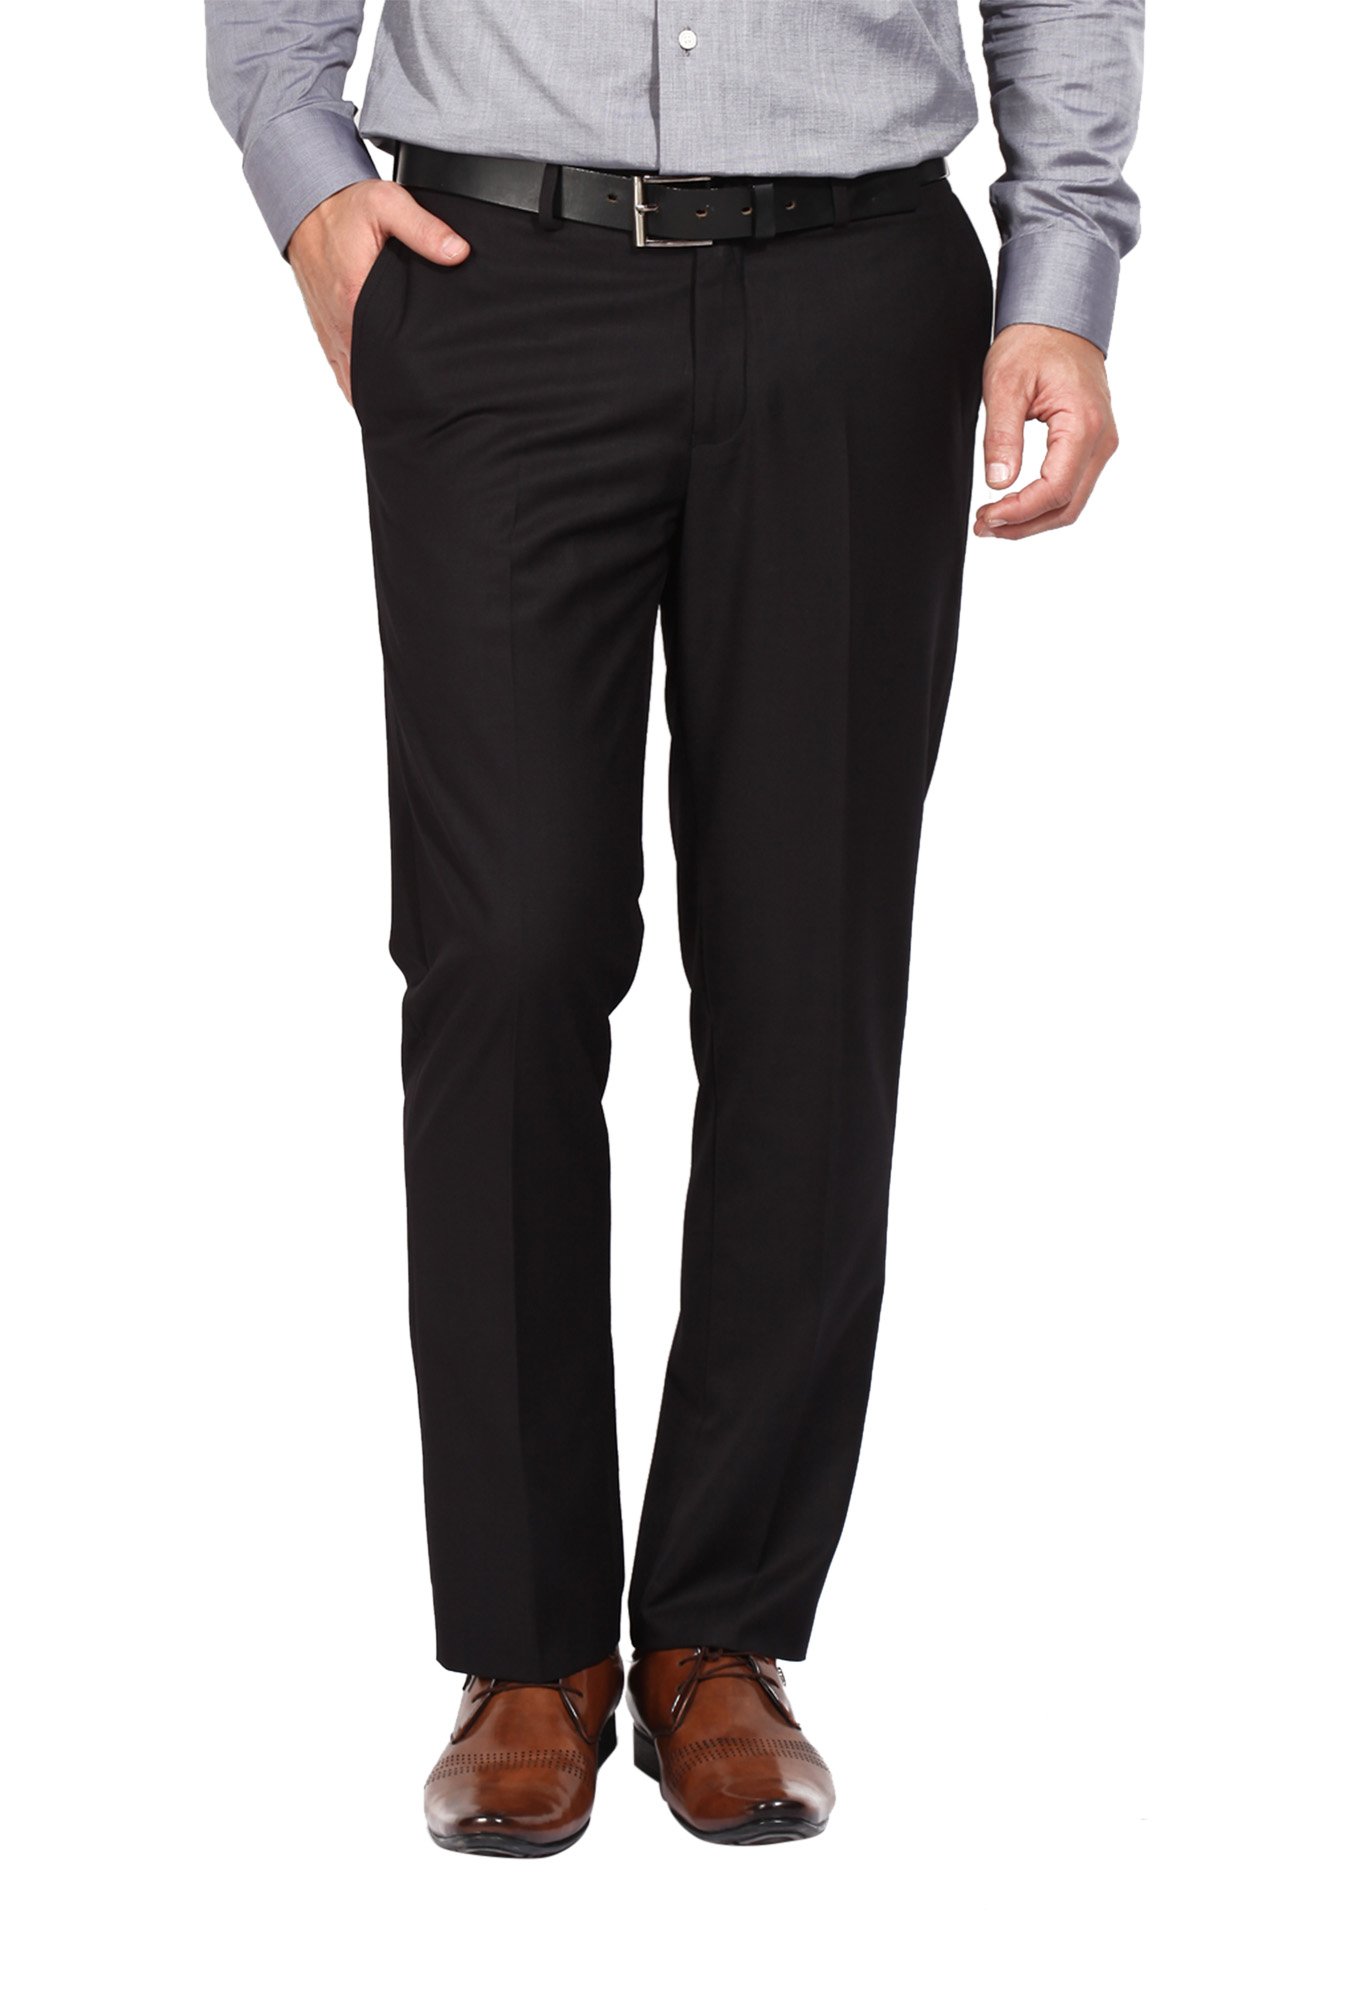 Buy BLACKBERRYS Mens Skinny Fit 4 Pocket Solid Chinos | Shoppers Stop